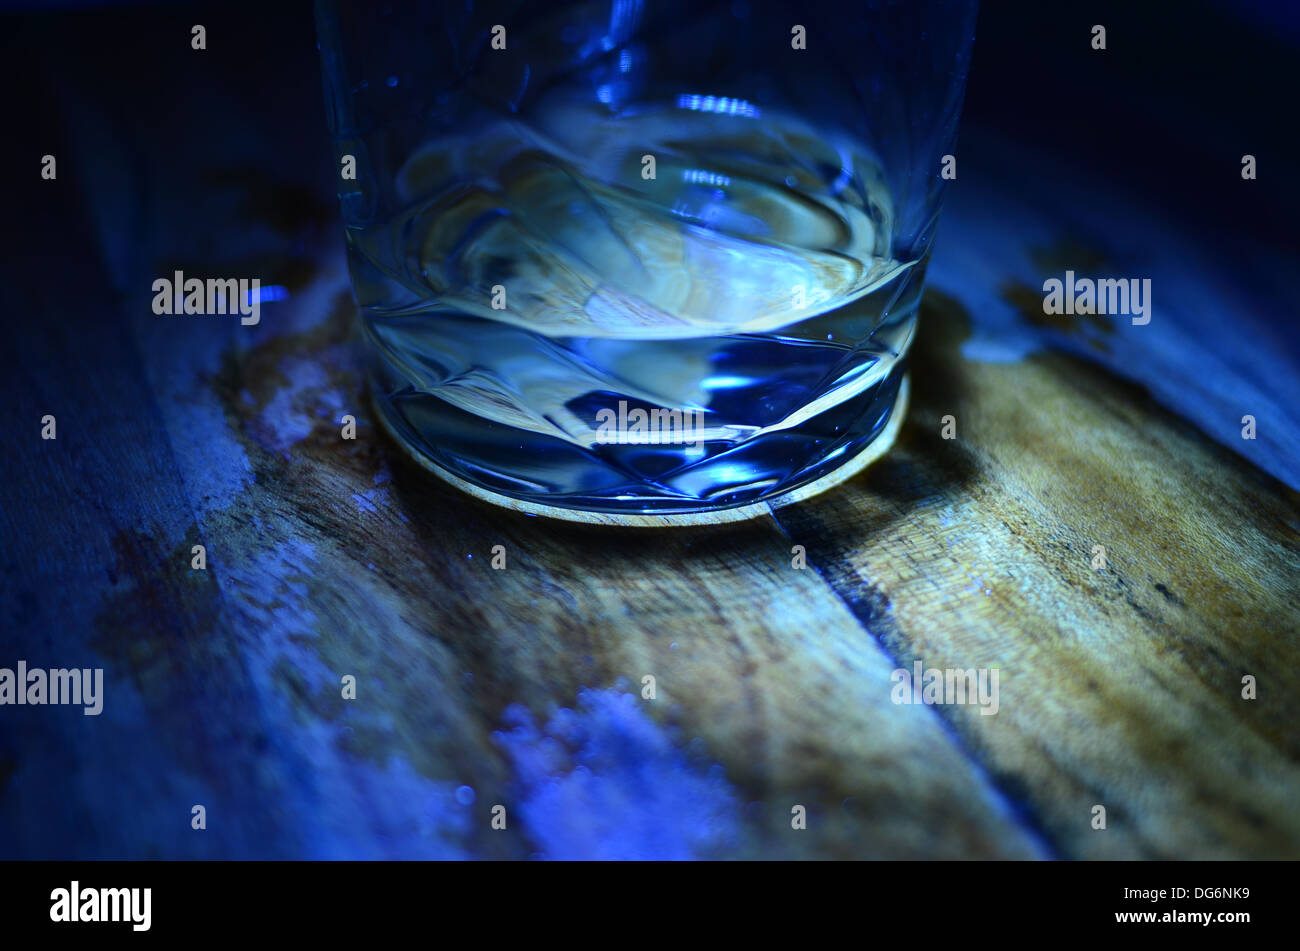 Glass of water on wooden table with spillage stain at night Stock Photo